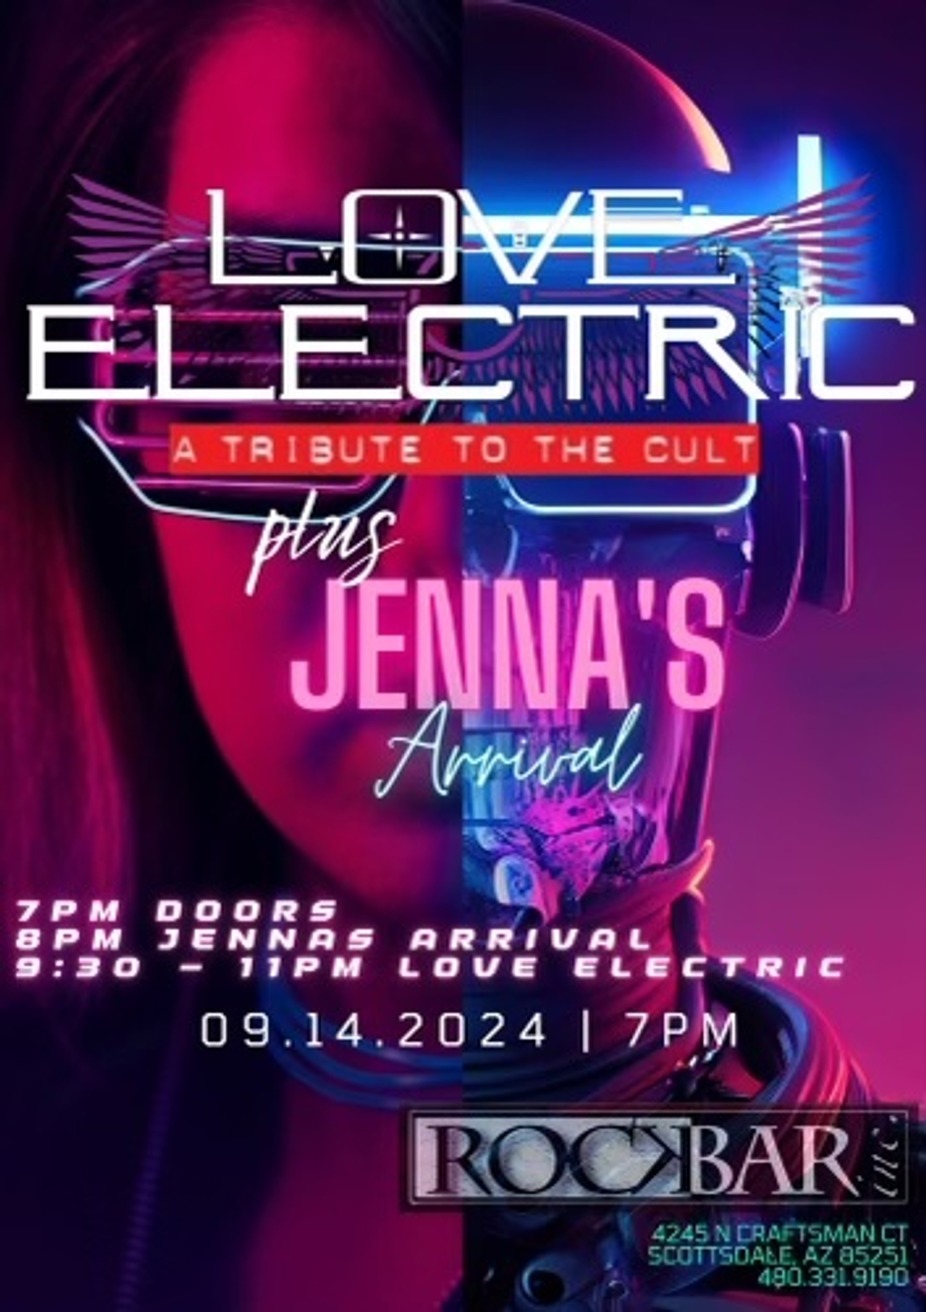 Love Electric 'A Tribute to The Cult' event photo